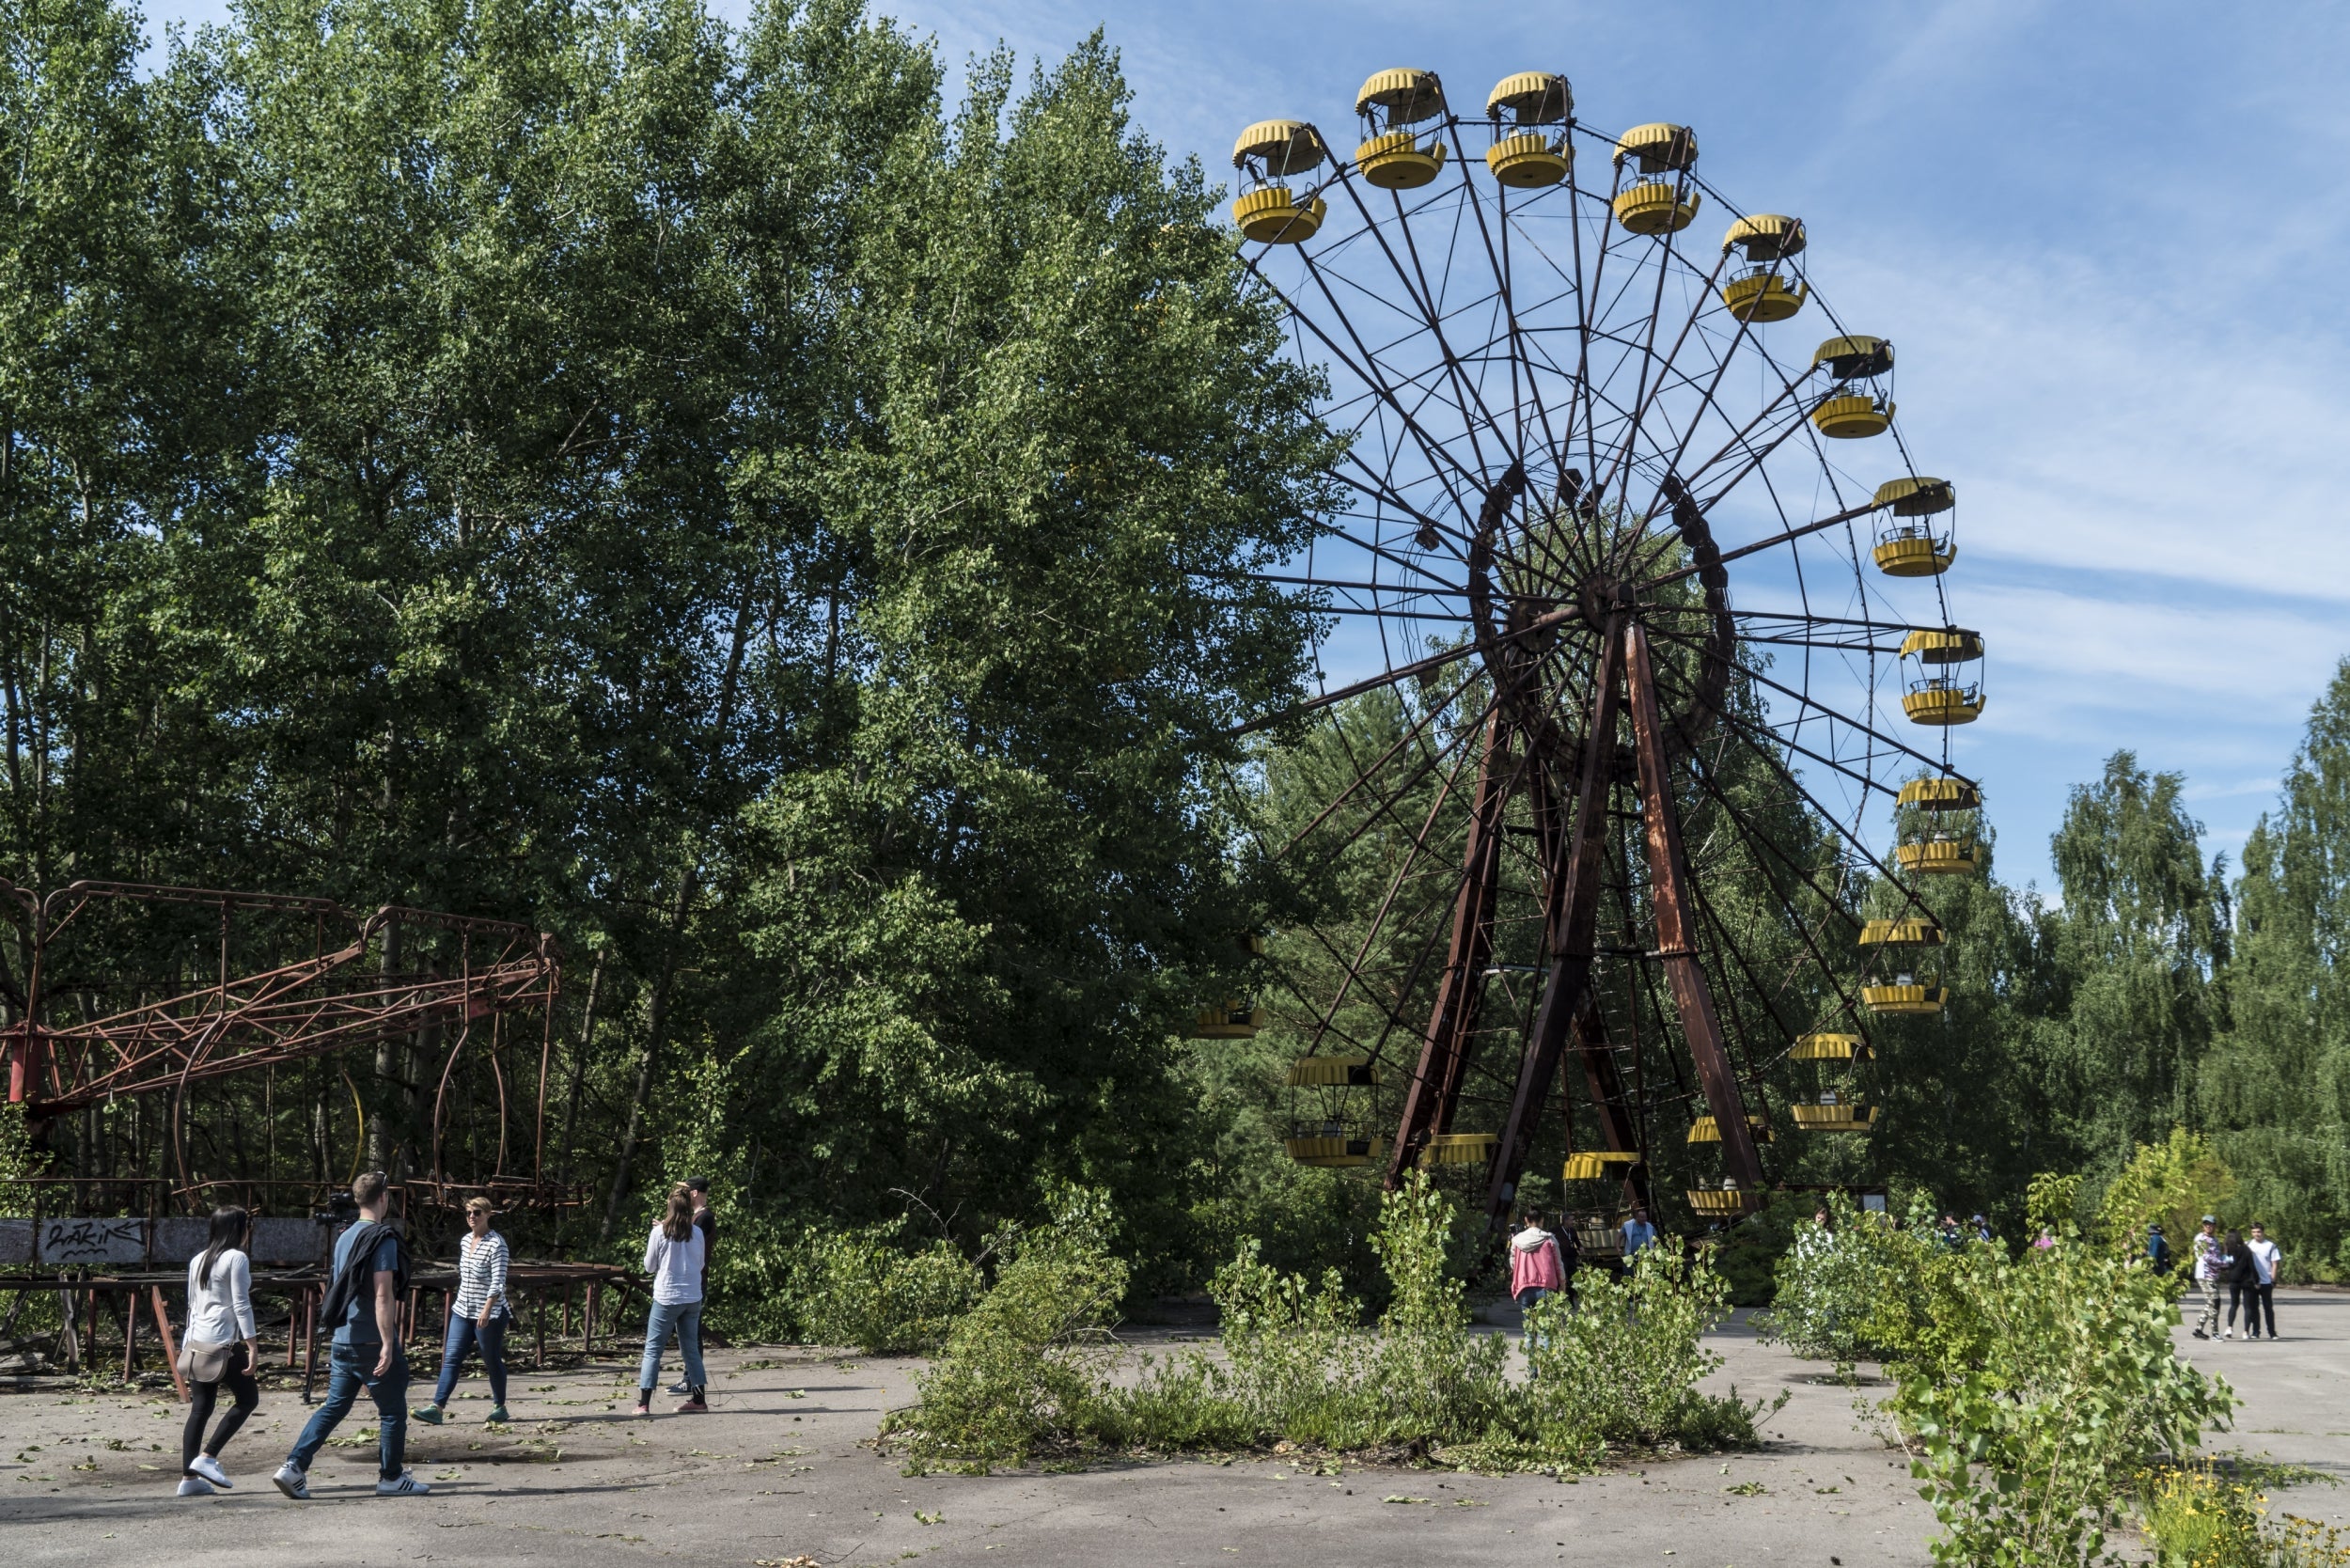 The exposure to radiation at Chernobyl is about as safe as a two-hour flight